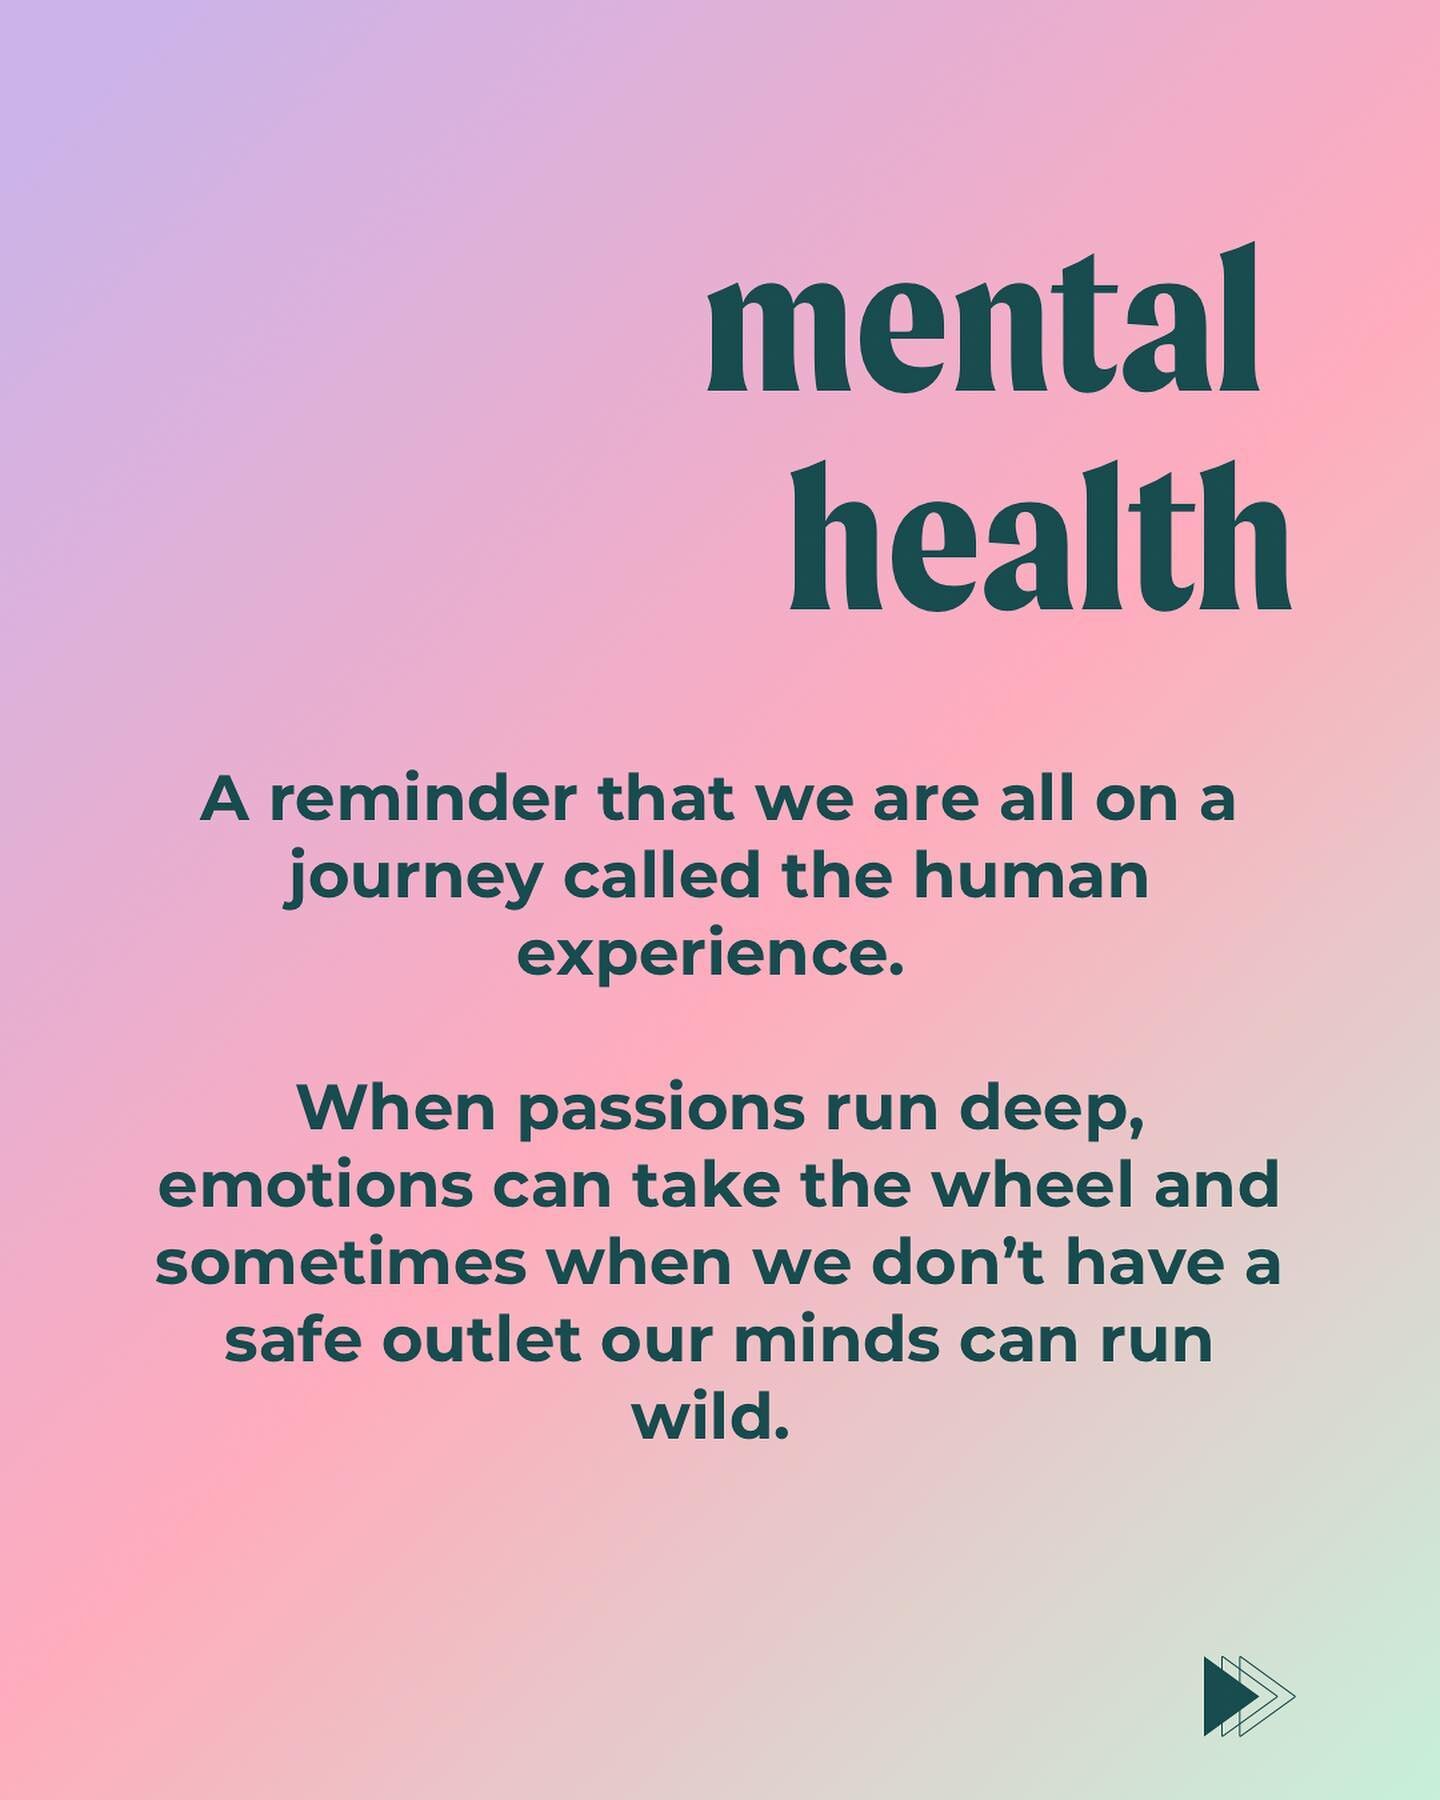 On this World Mental Health Day, I want to share a truth I've learned on my journey: Your mind can sometimes feel like an opponent, but that doesn't mean you can't still love what you do and succeed beyond measure.

🌈 It's easy to let our thoughts c